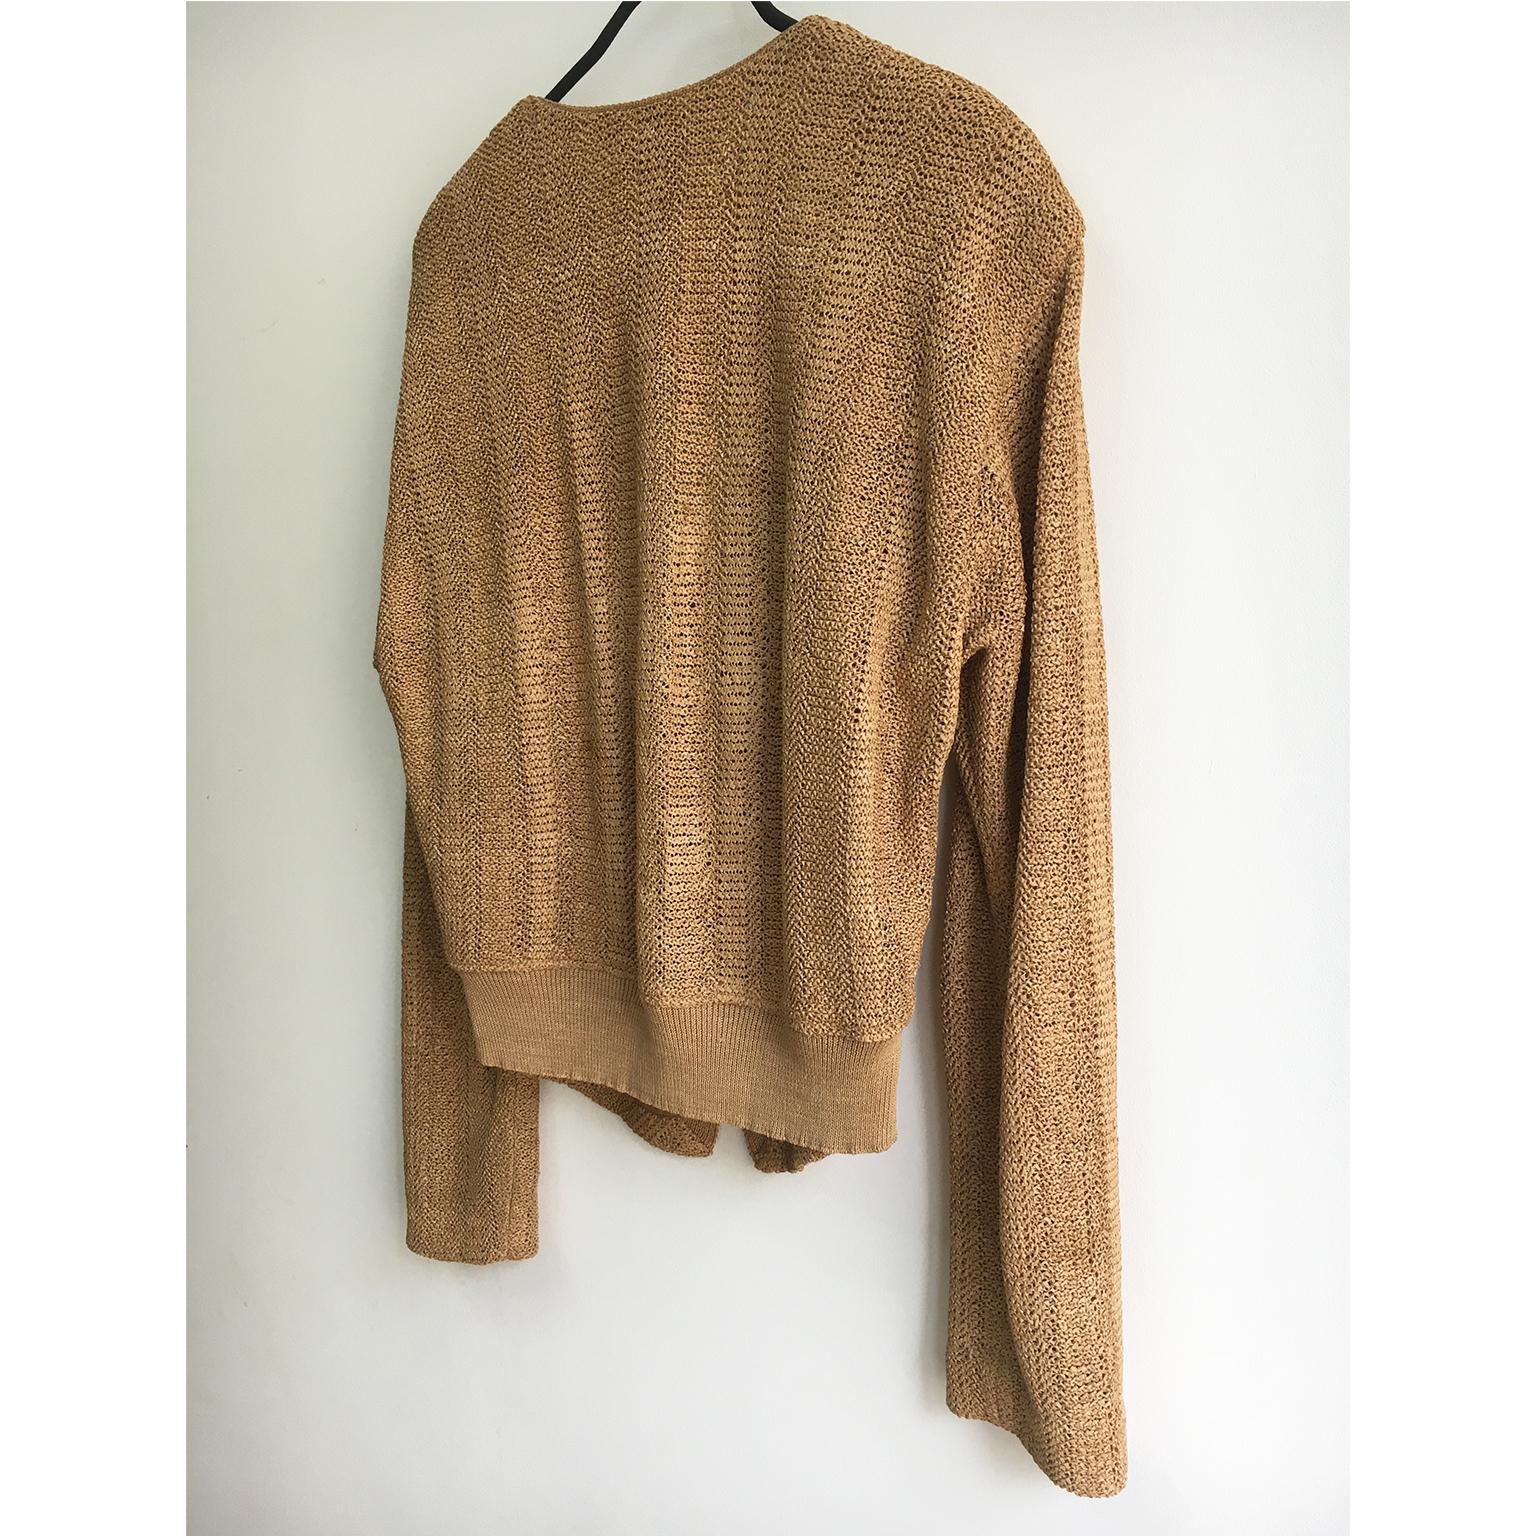 Issey Miyake men rayon straw cardigan from early 90s collection. 
Incredible texture rayon knit in a natural tan beige colour with two tone type of woven stripes.

Size : M (It fits like oversize, L)
Sleeve : 71 cm
Back length : 65 cm

